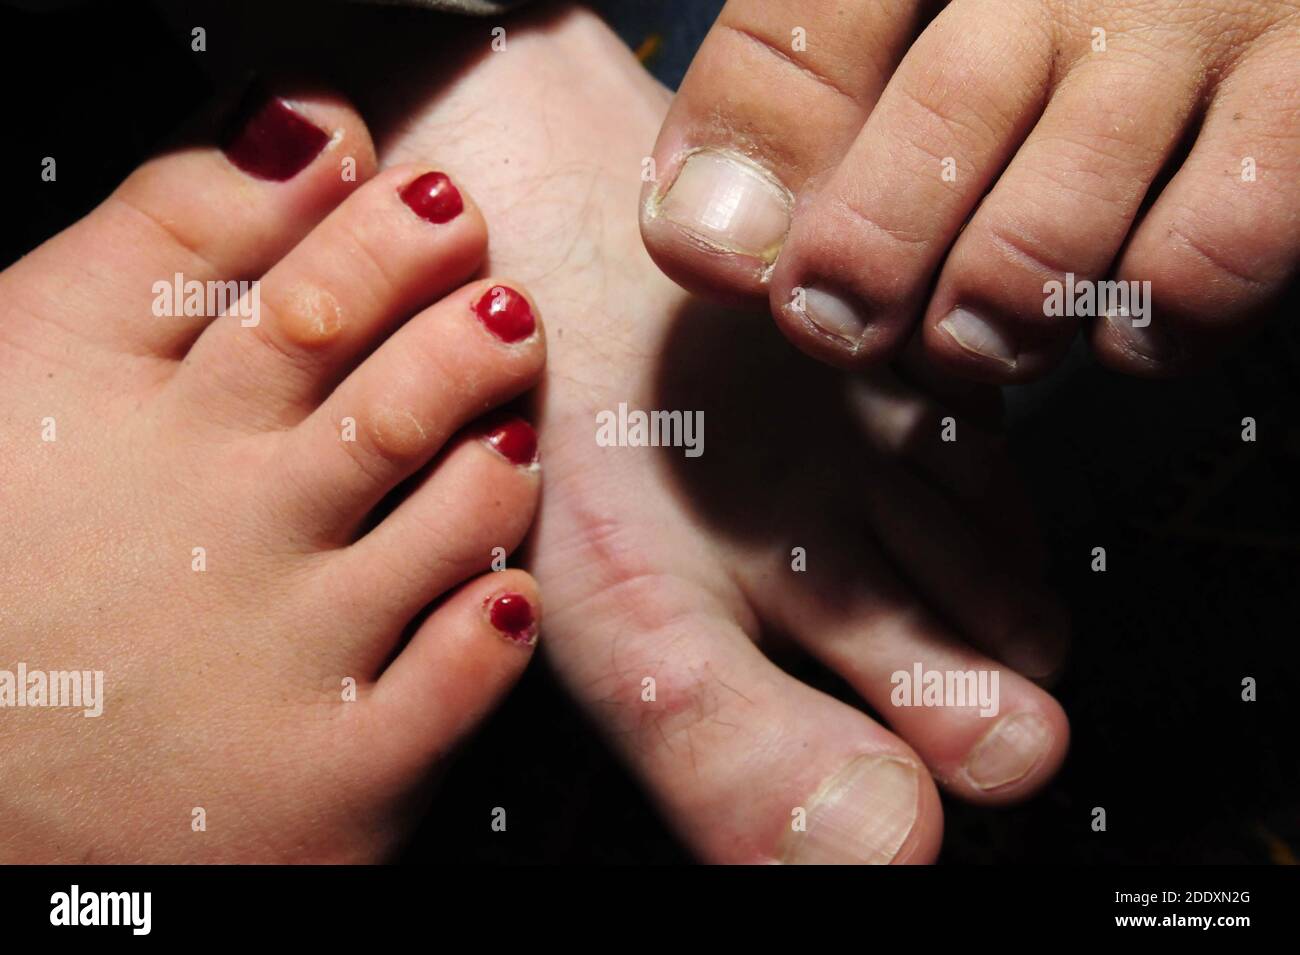 Ordinary Female Feet With Painted Nails. Fetish Stock Photo, Picture and  Royalty Free Image. Image 140544821.